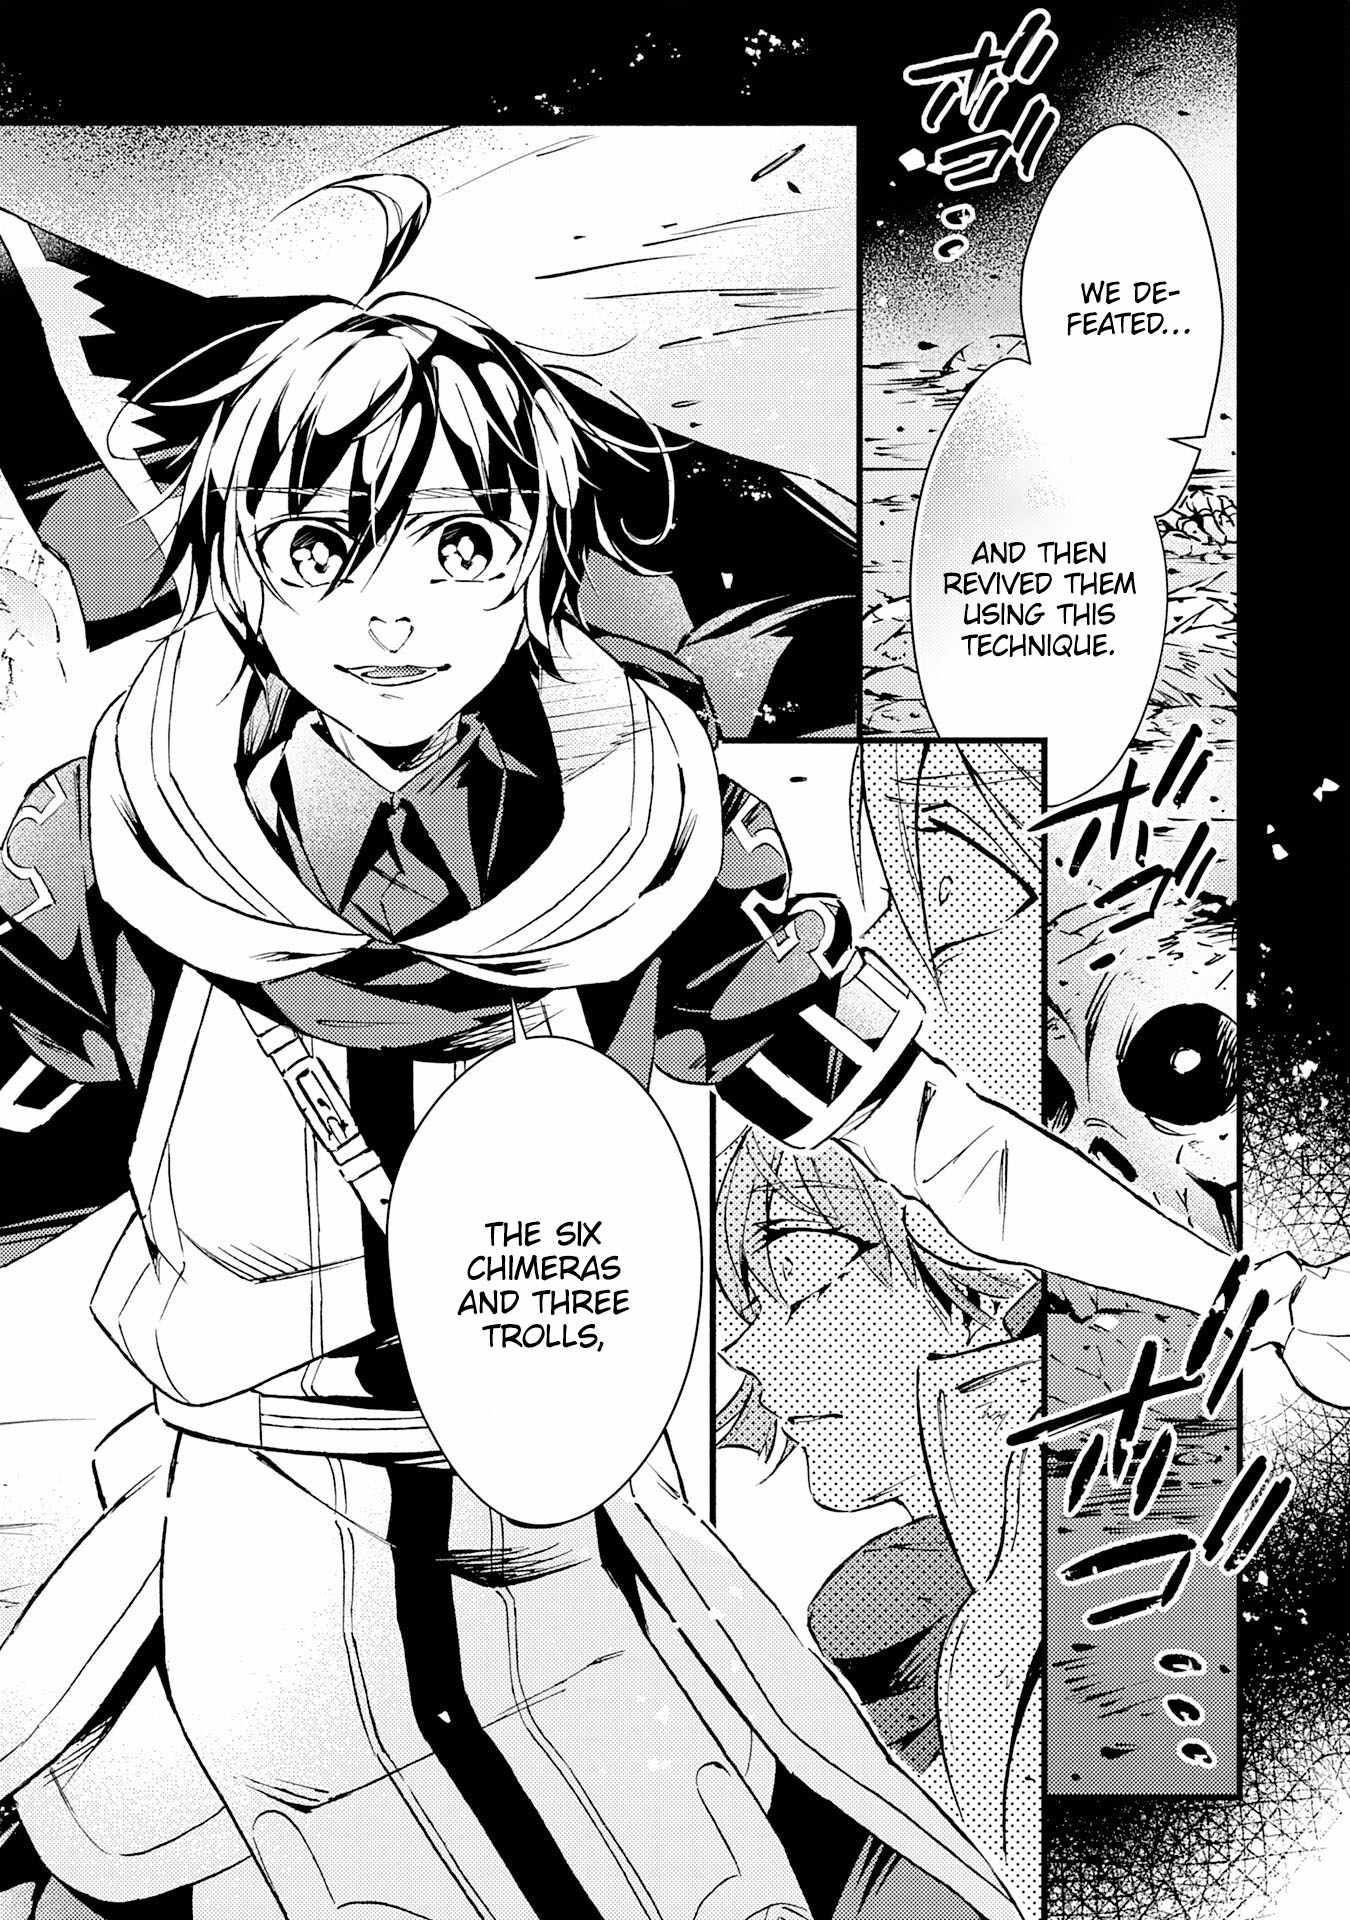 read The Solo Necromancer Who Leads an Immortal Army Transfers to Become an Sss-Rank Adventurer Chapter 17 Manga Online Free at Mangabuddy, MangaNato,Manhwatop | MangaSo.com